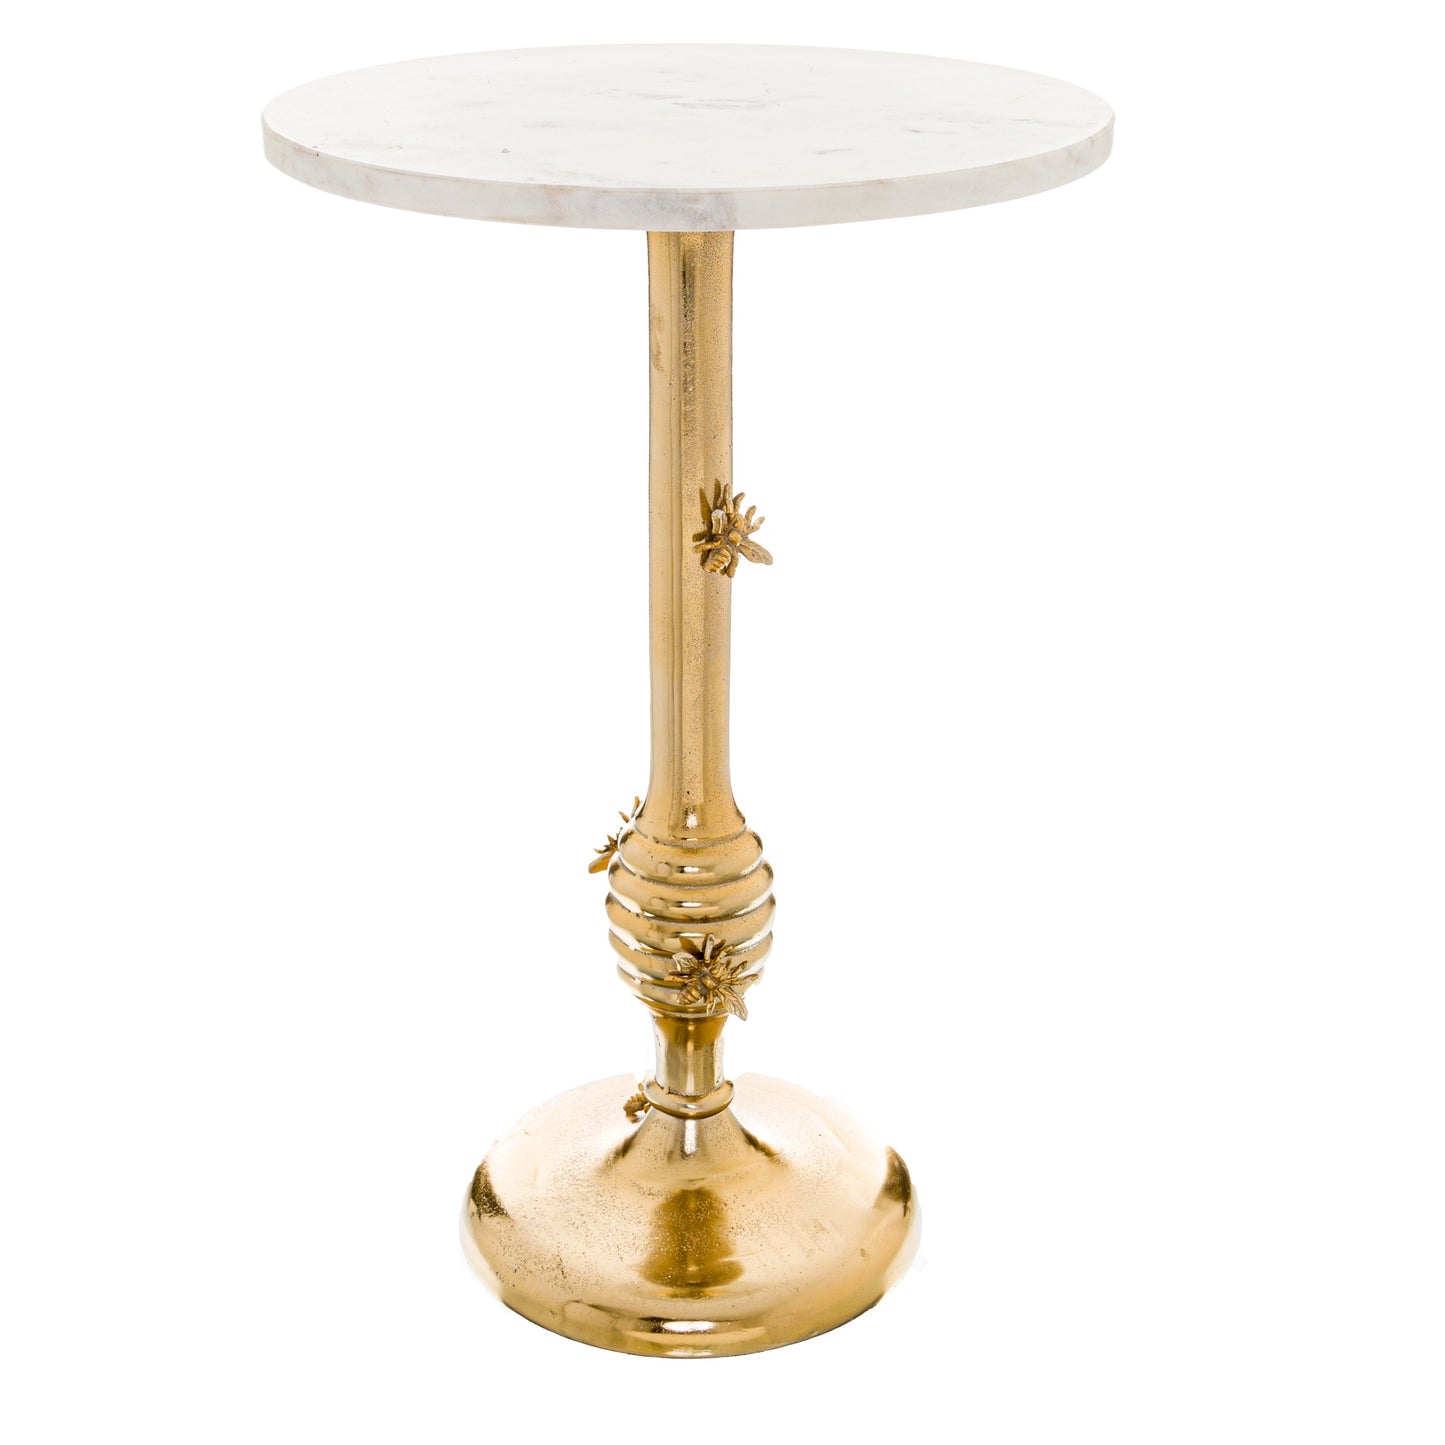 side table consisting of 3 pieces which screw together the table base is made if metal in gold with joney bees attached up the stem. a white round marble top that screws in. this small table is very elegant and small so can sit in any area you want to place it. 